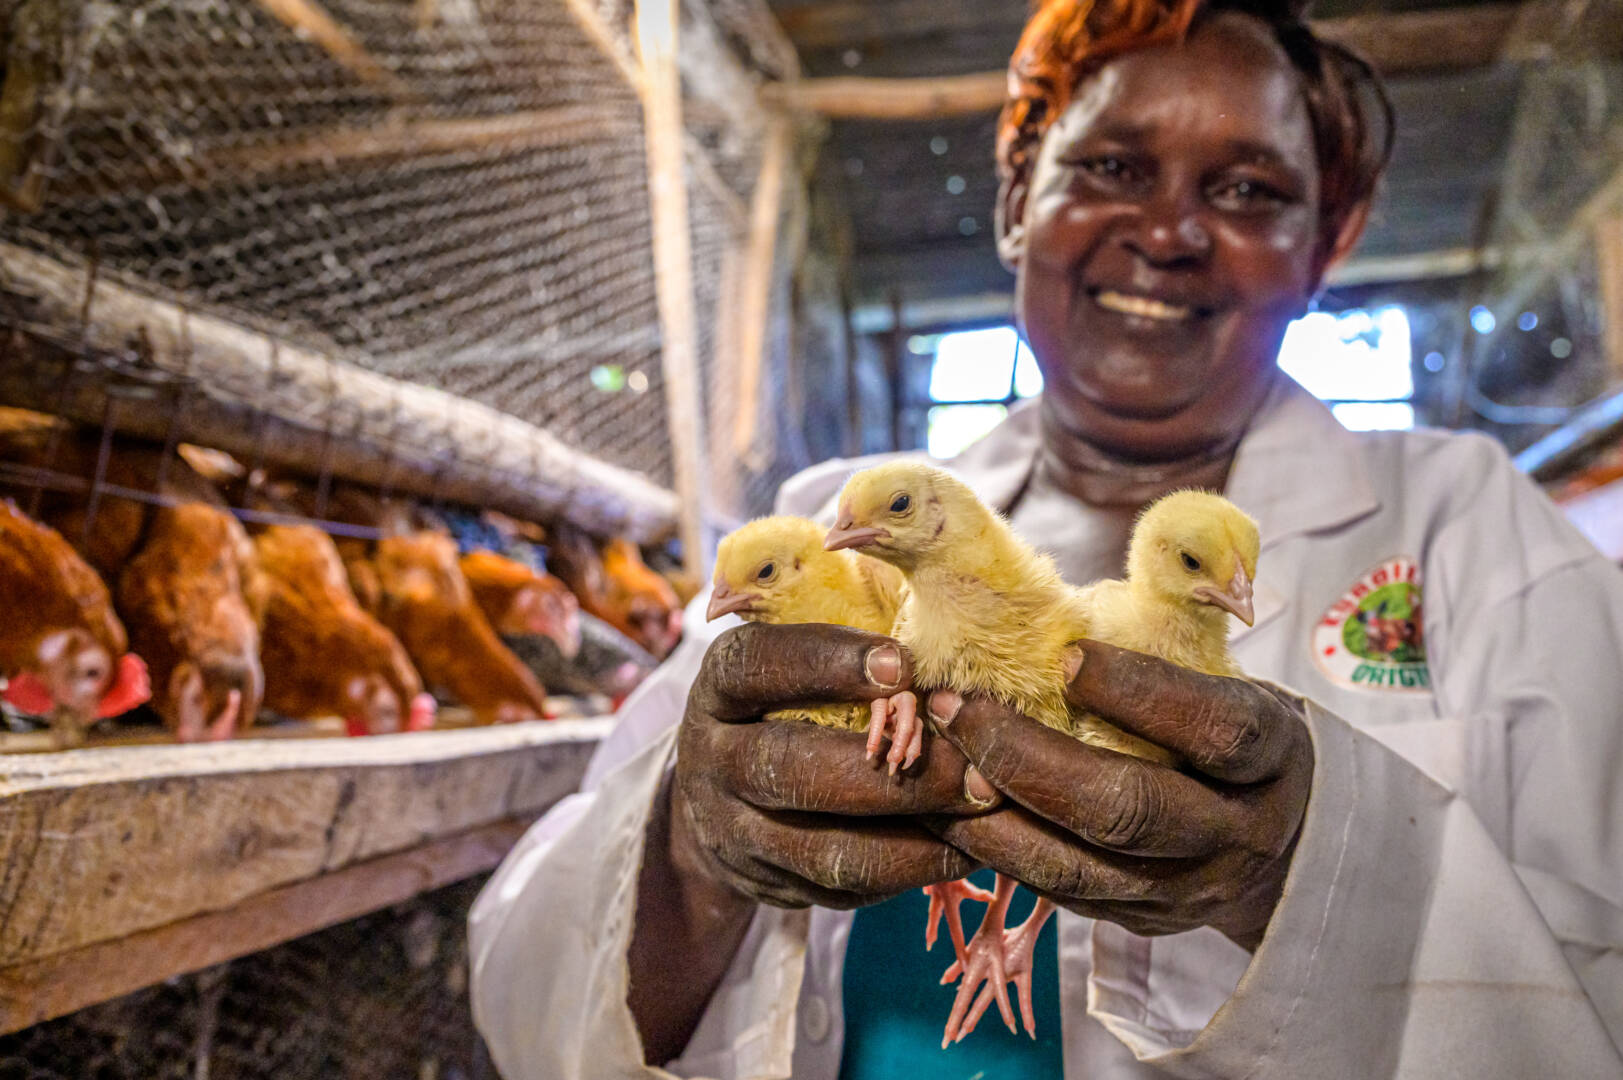 A happy woman with a big smile holds three chicks in her hands.